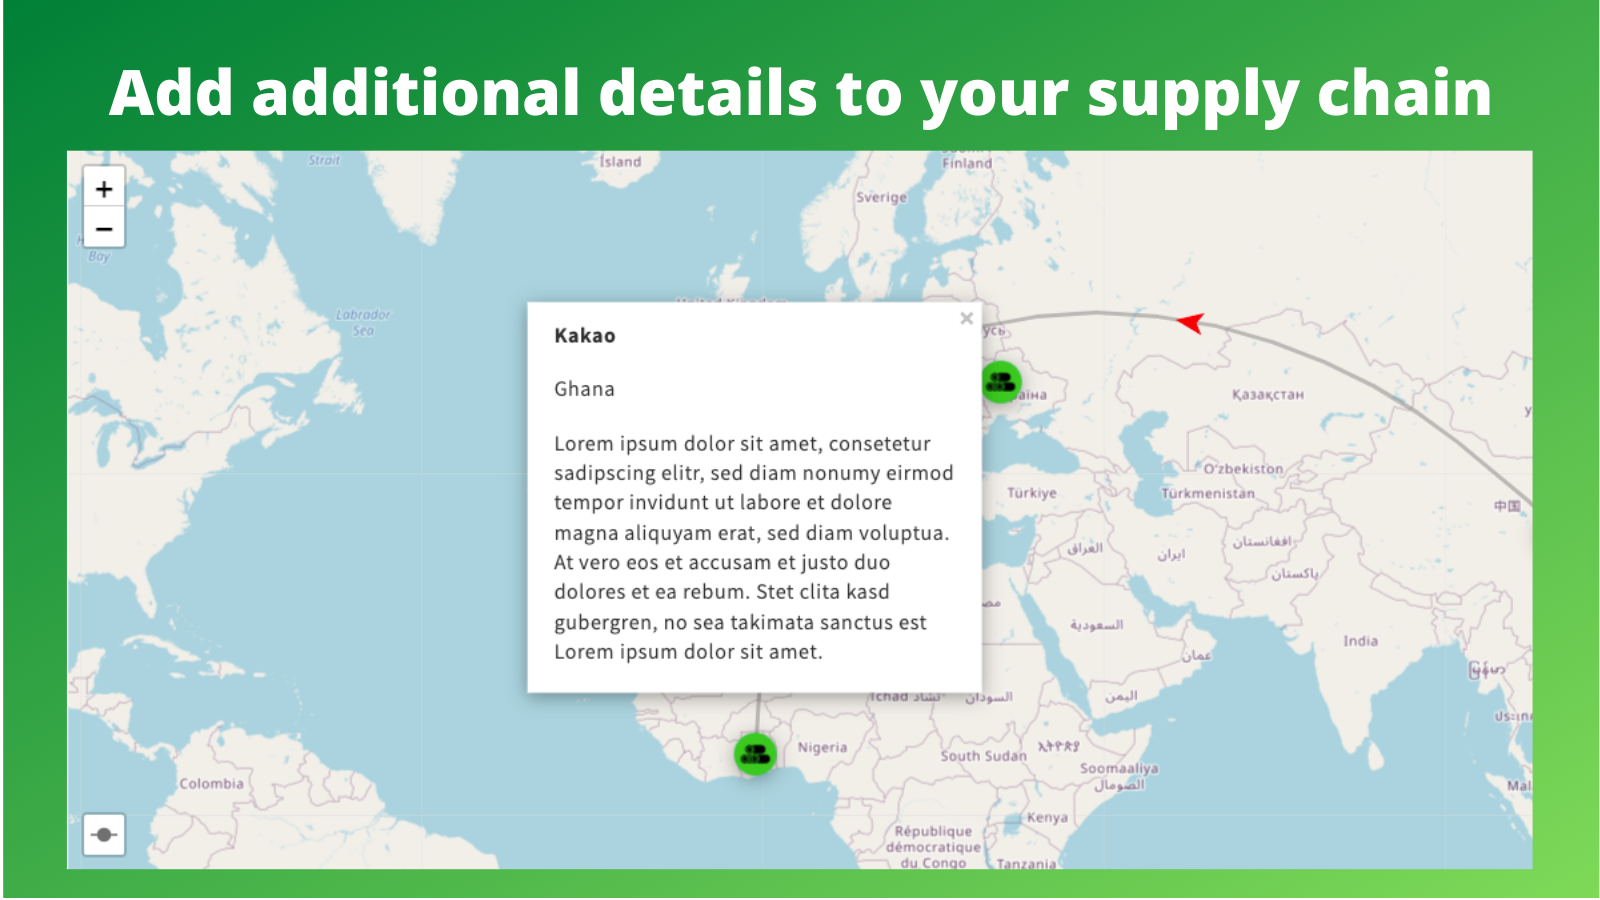 Add additional details to your supply chain